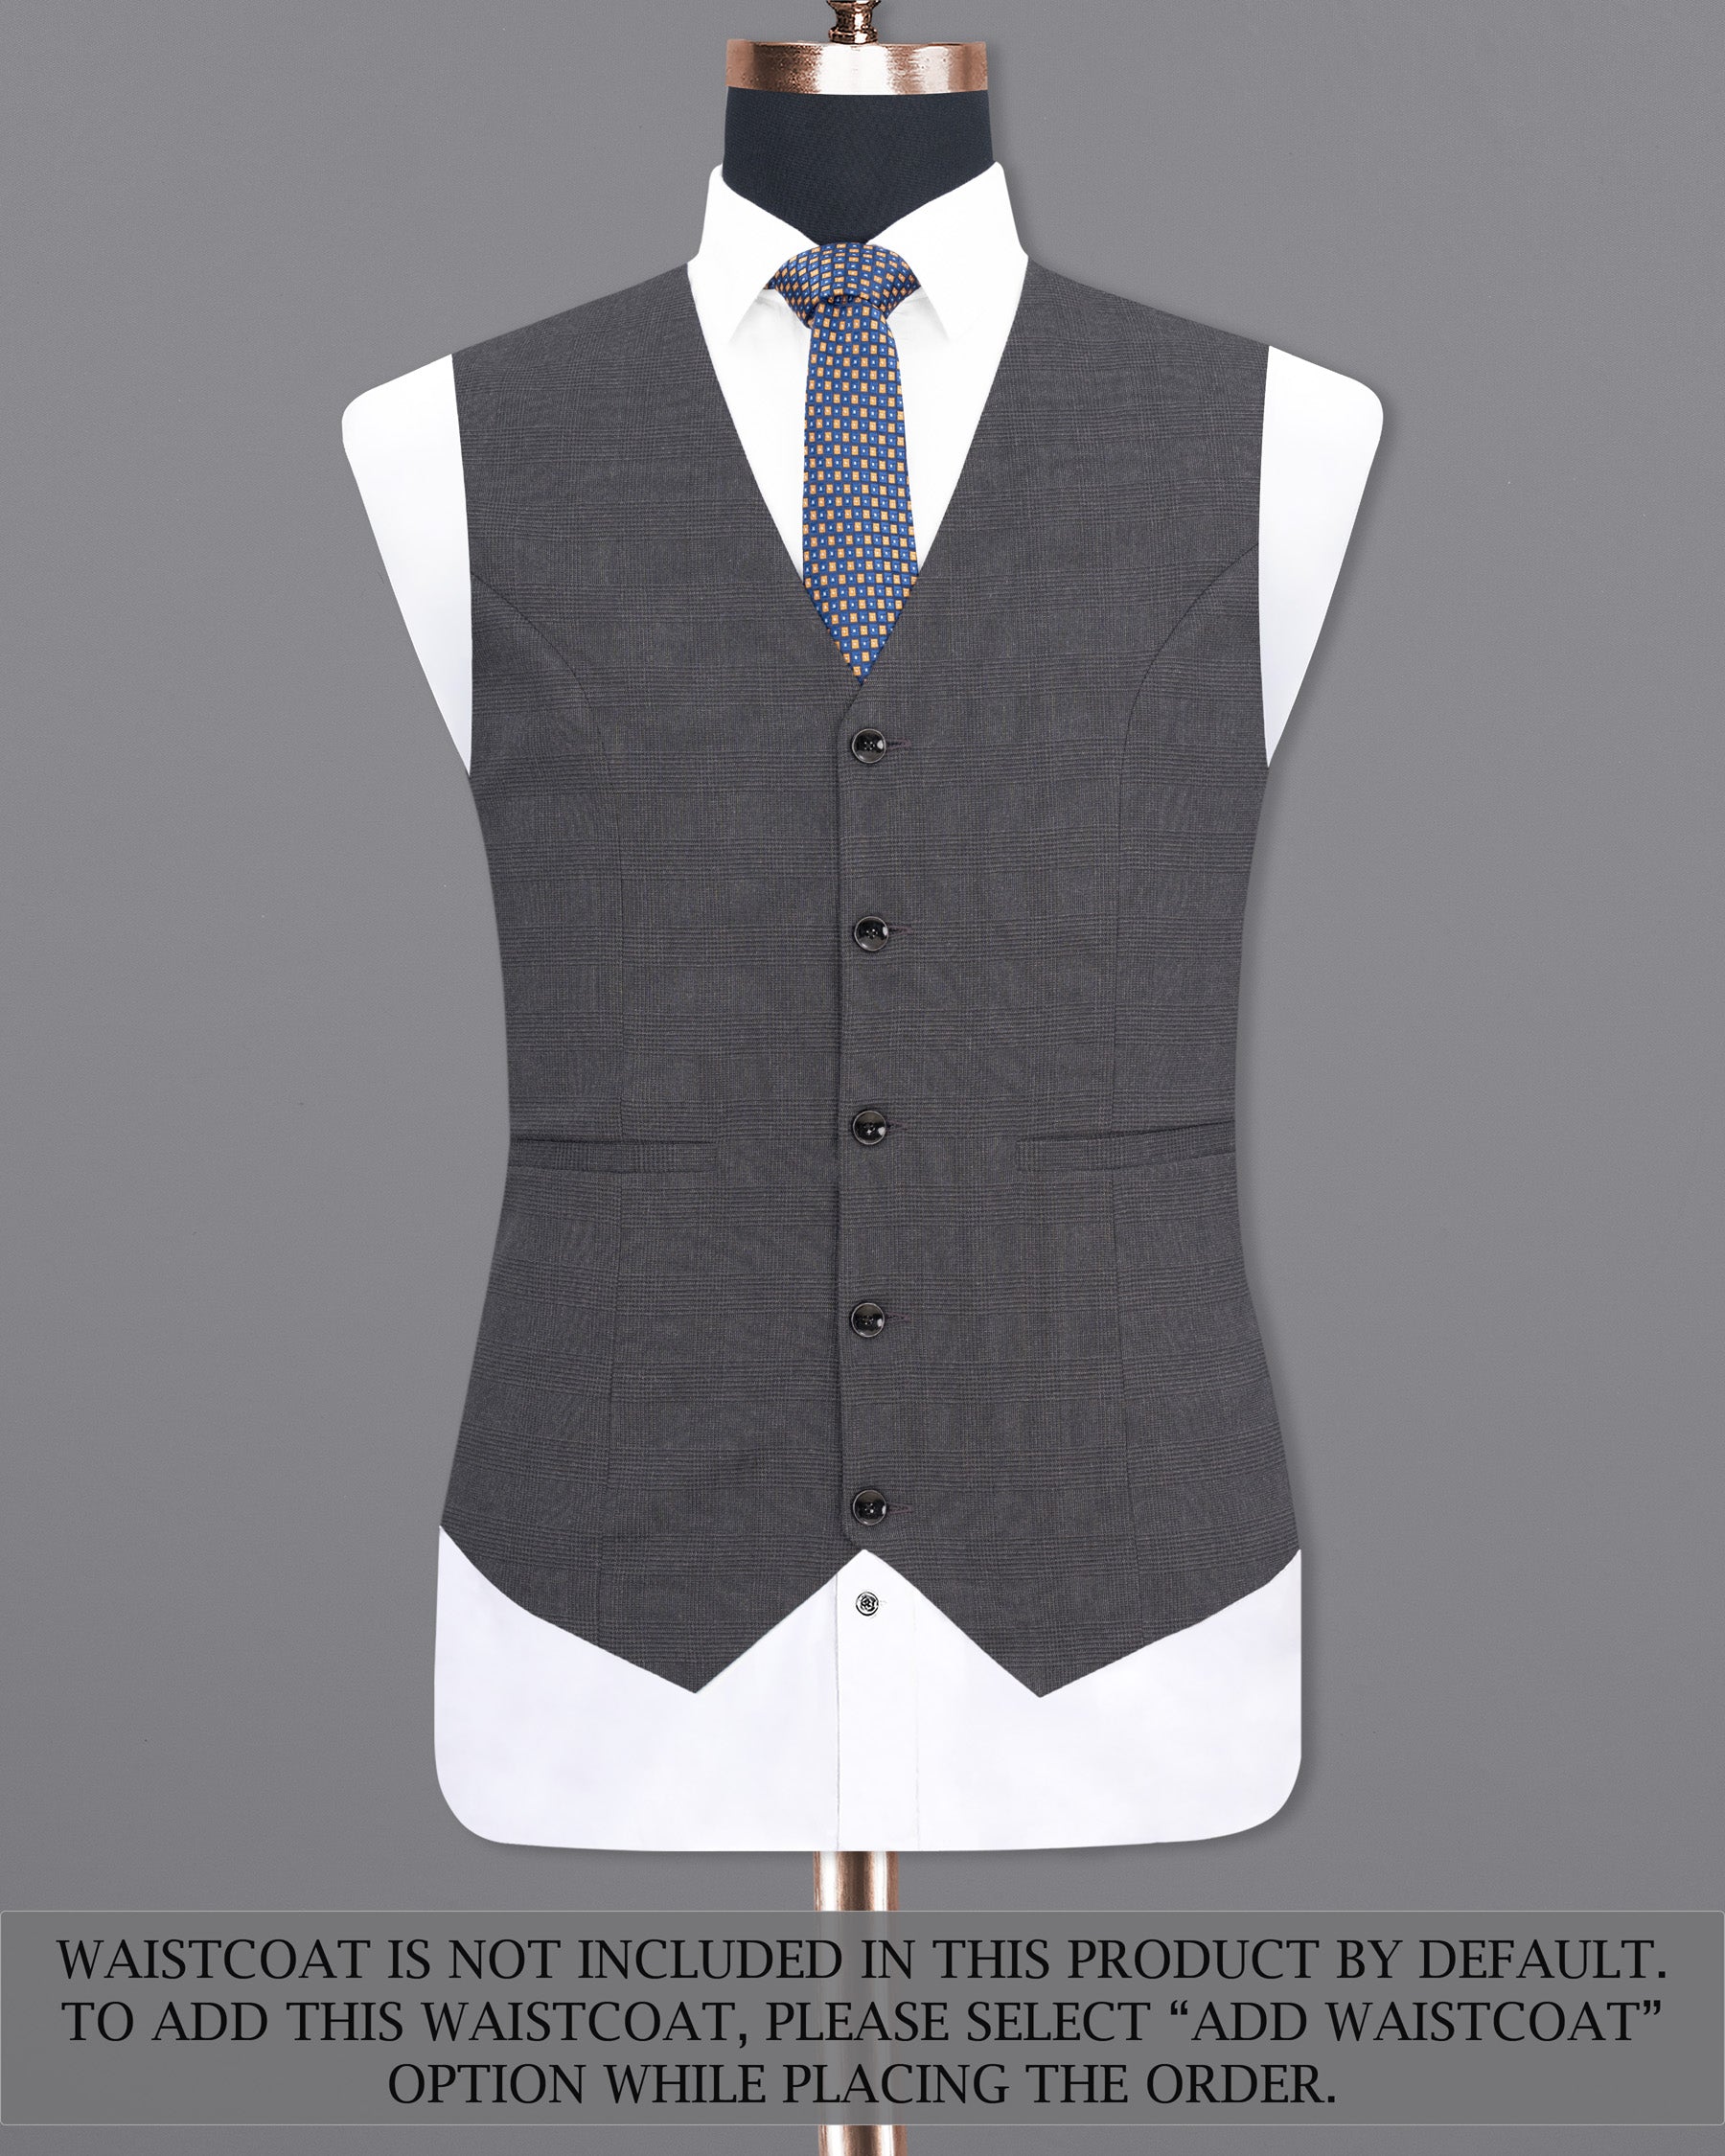 Gravel Gray Plaid Single Breasted Suit ST1849-SB-36, ST1849-SB-38, ST1849-SB-40, ST1849-SB-42, ST1849-SB-44, ST1849-SB-46, ST1849-SB-48, ST1849-SB-50, ST1849-SB-52, ST1849-SB-54, ST1849-SB-56, ST1849-SB-58, ST1849-SB-60